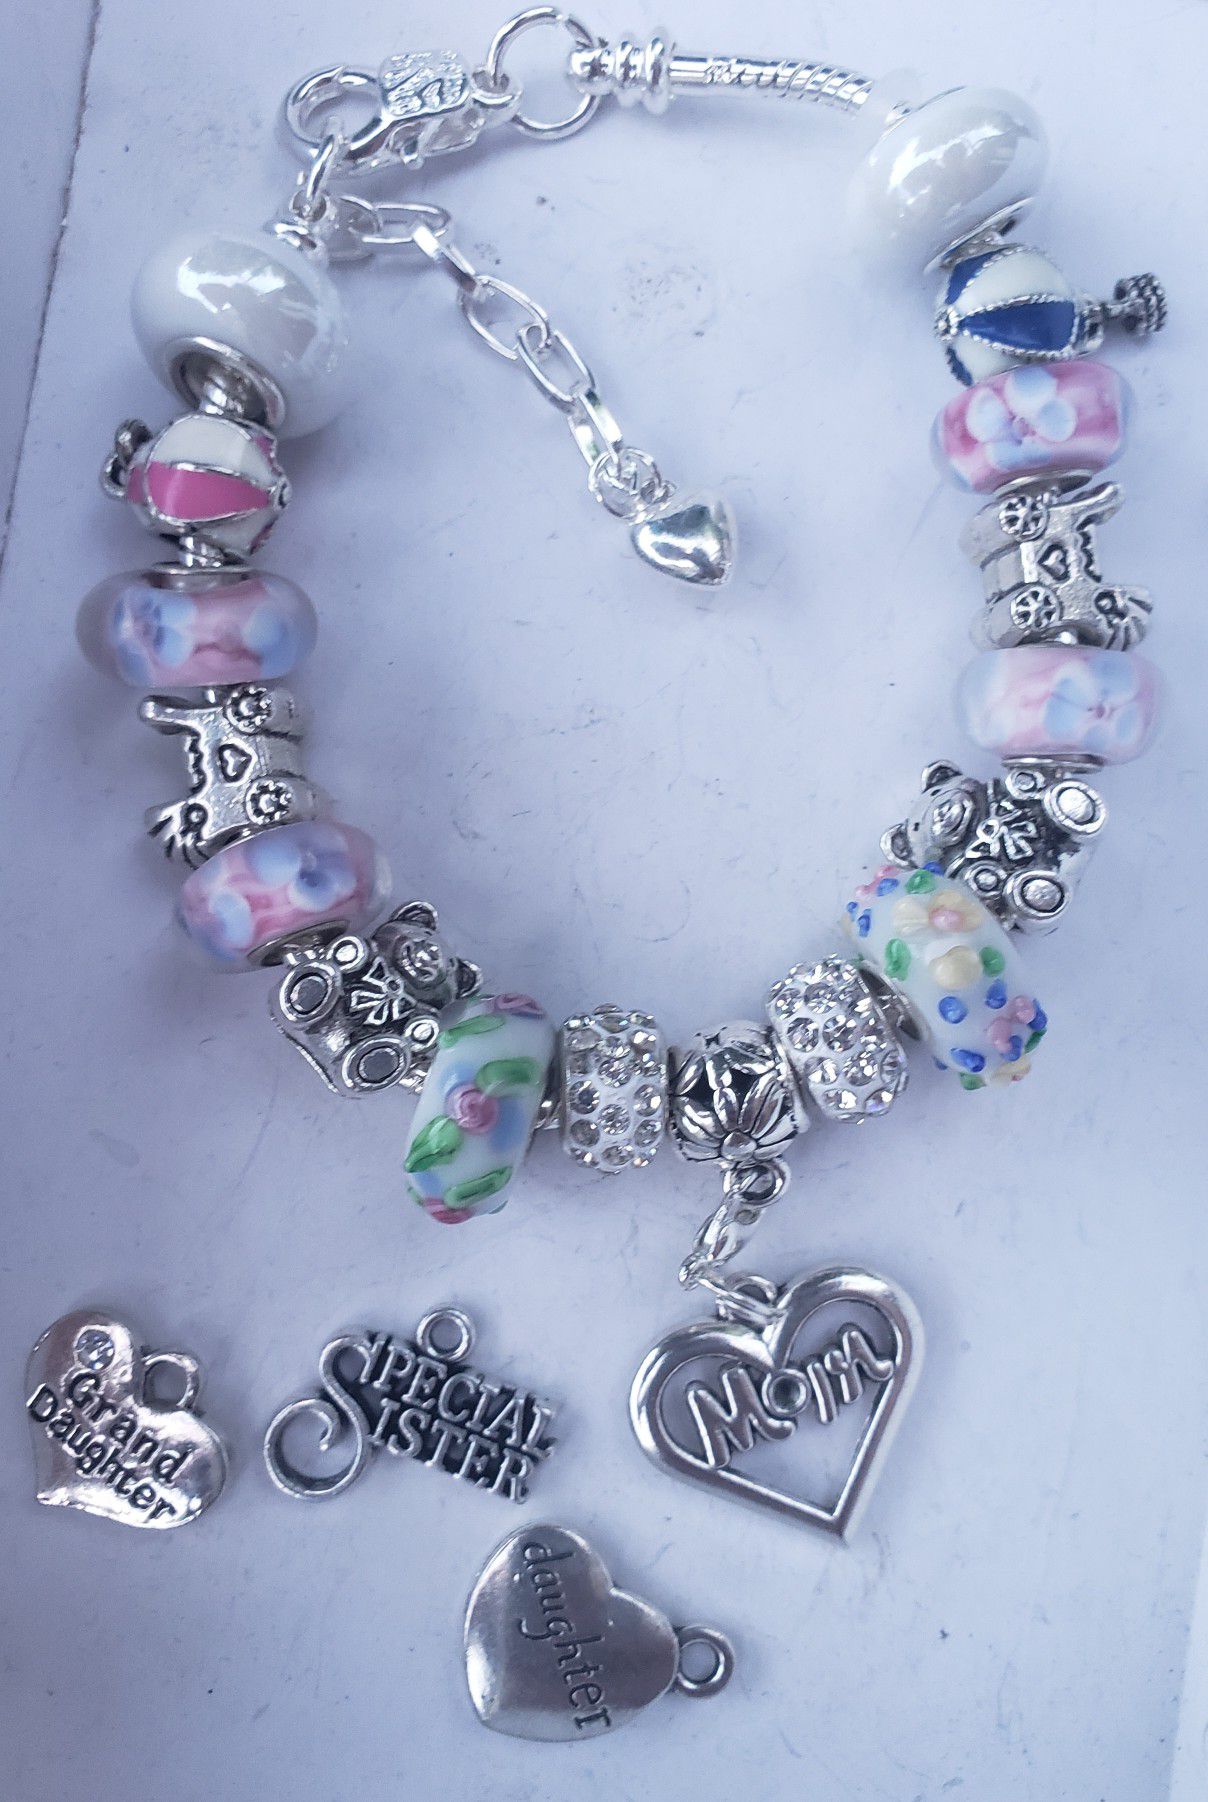 Netural mom to be charm bracelet 1 for $15 or 2 for $25